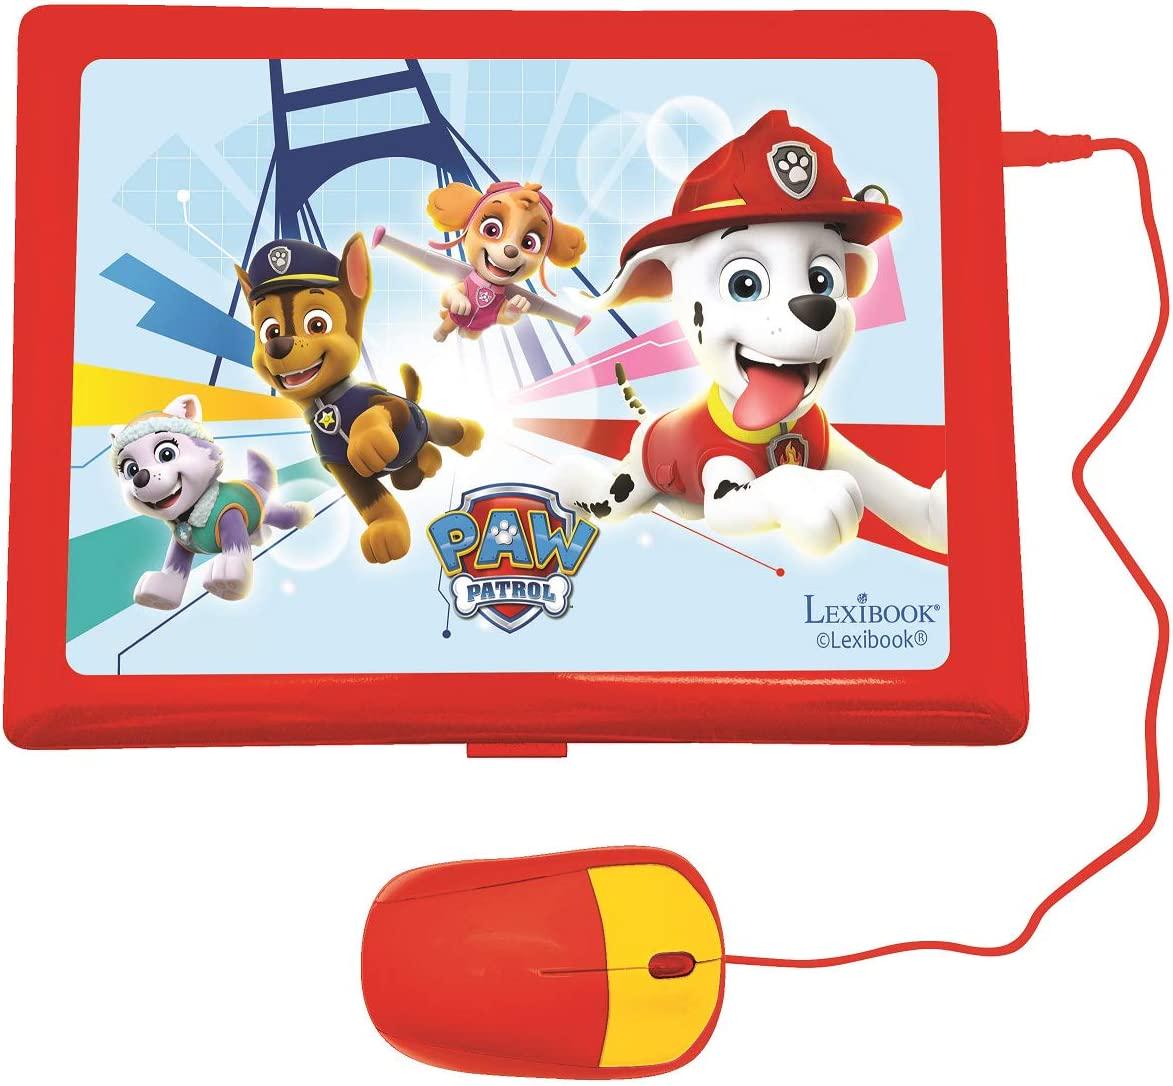 Lexibook, LEXIBOOK JC598PAi3 Paw Patrol-Educational and Bilingual Laptop German/English-Toy for Child Kid (Boys and Girls) 124 Activities, Learn Play Games and Music with Chase Marshall-Red/Blue